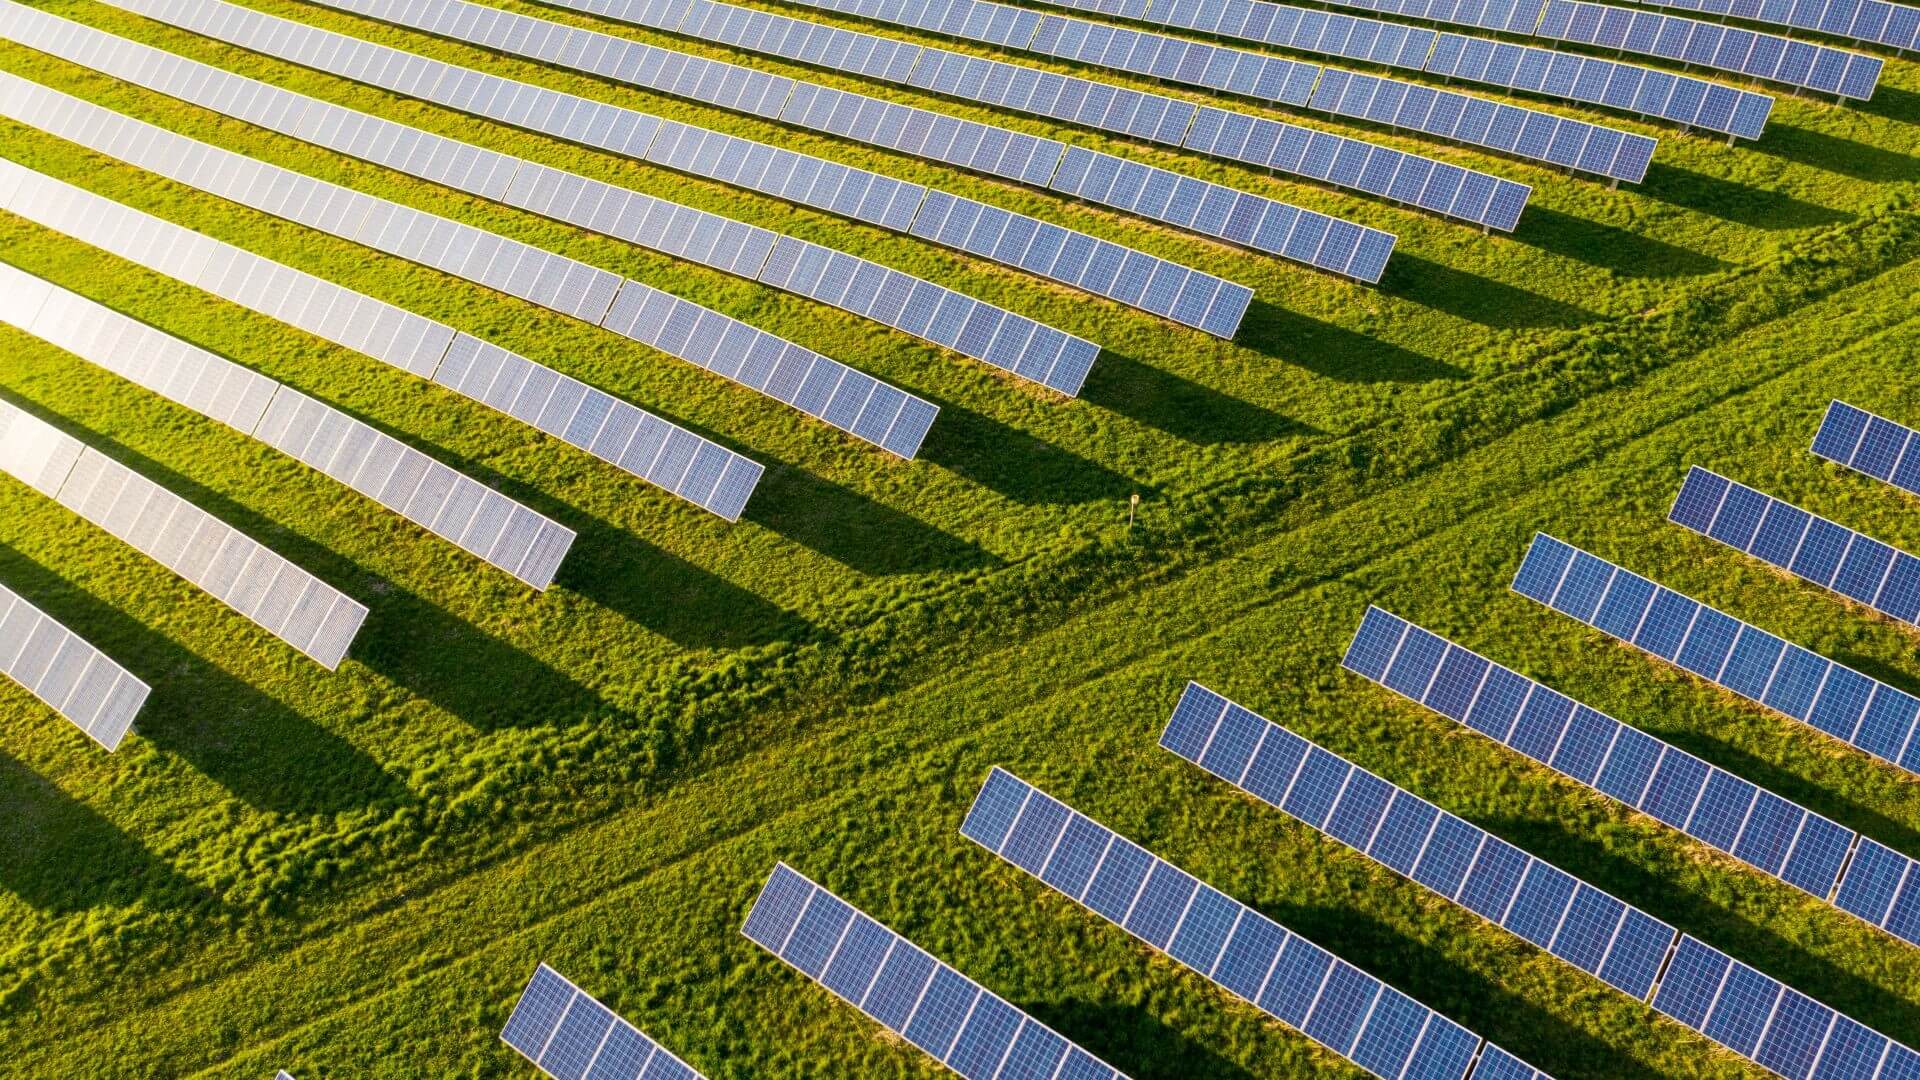 Aerial view of rows of solar panels in a field